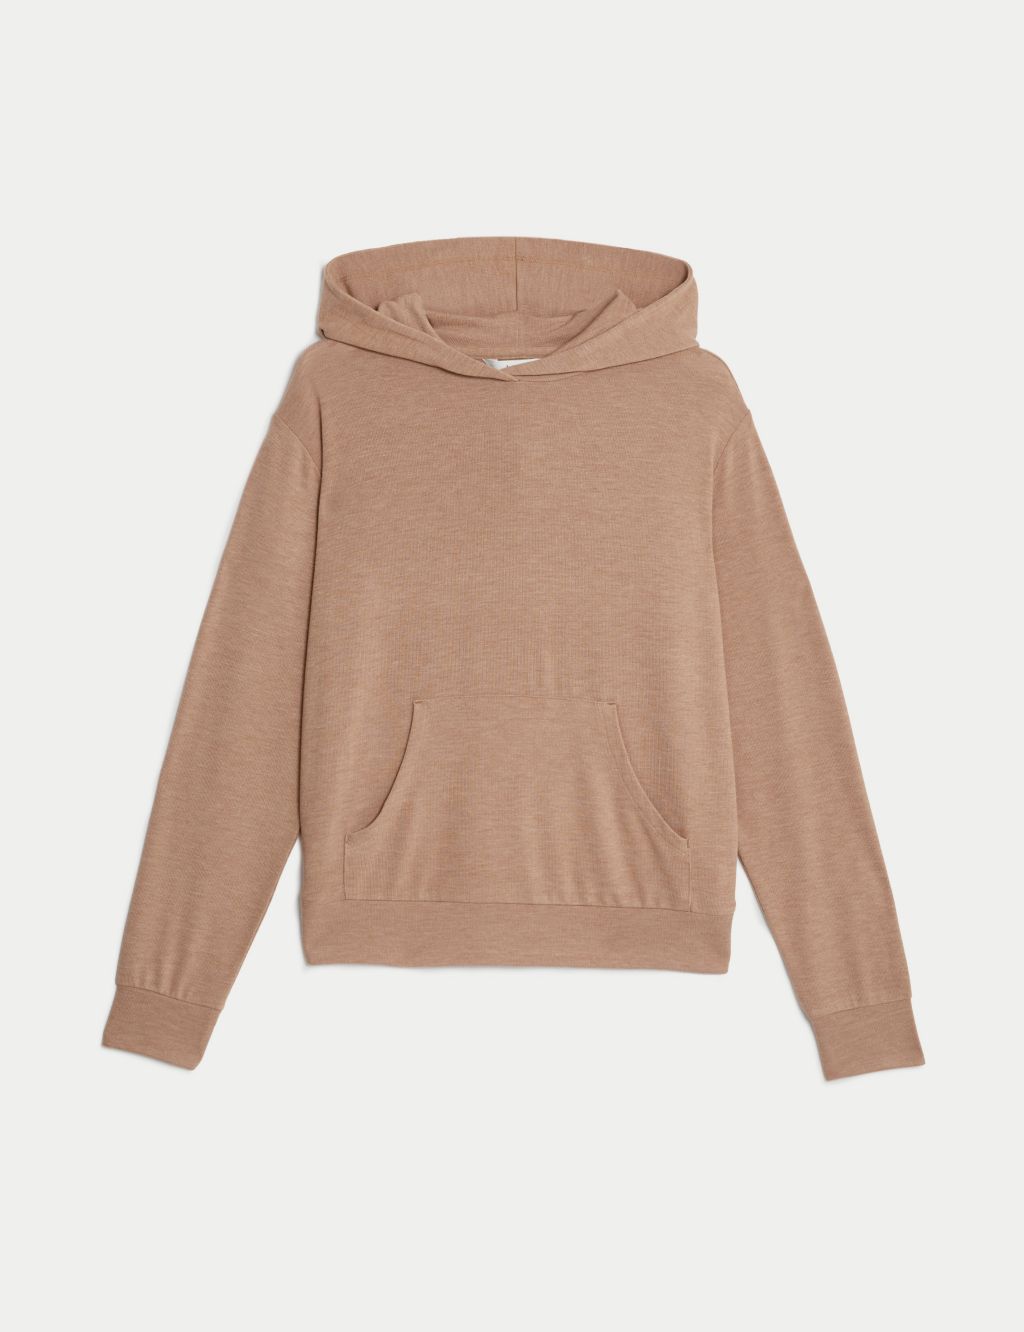 Cosy Lightweight Relaxed Hoodie image 2